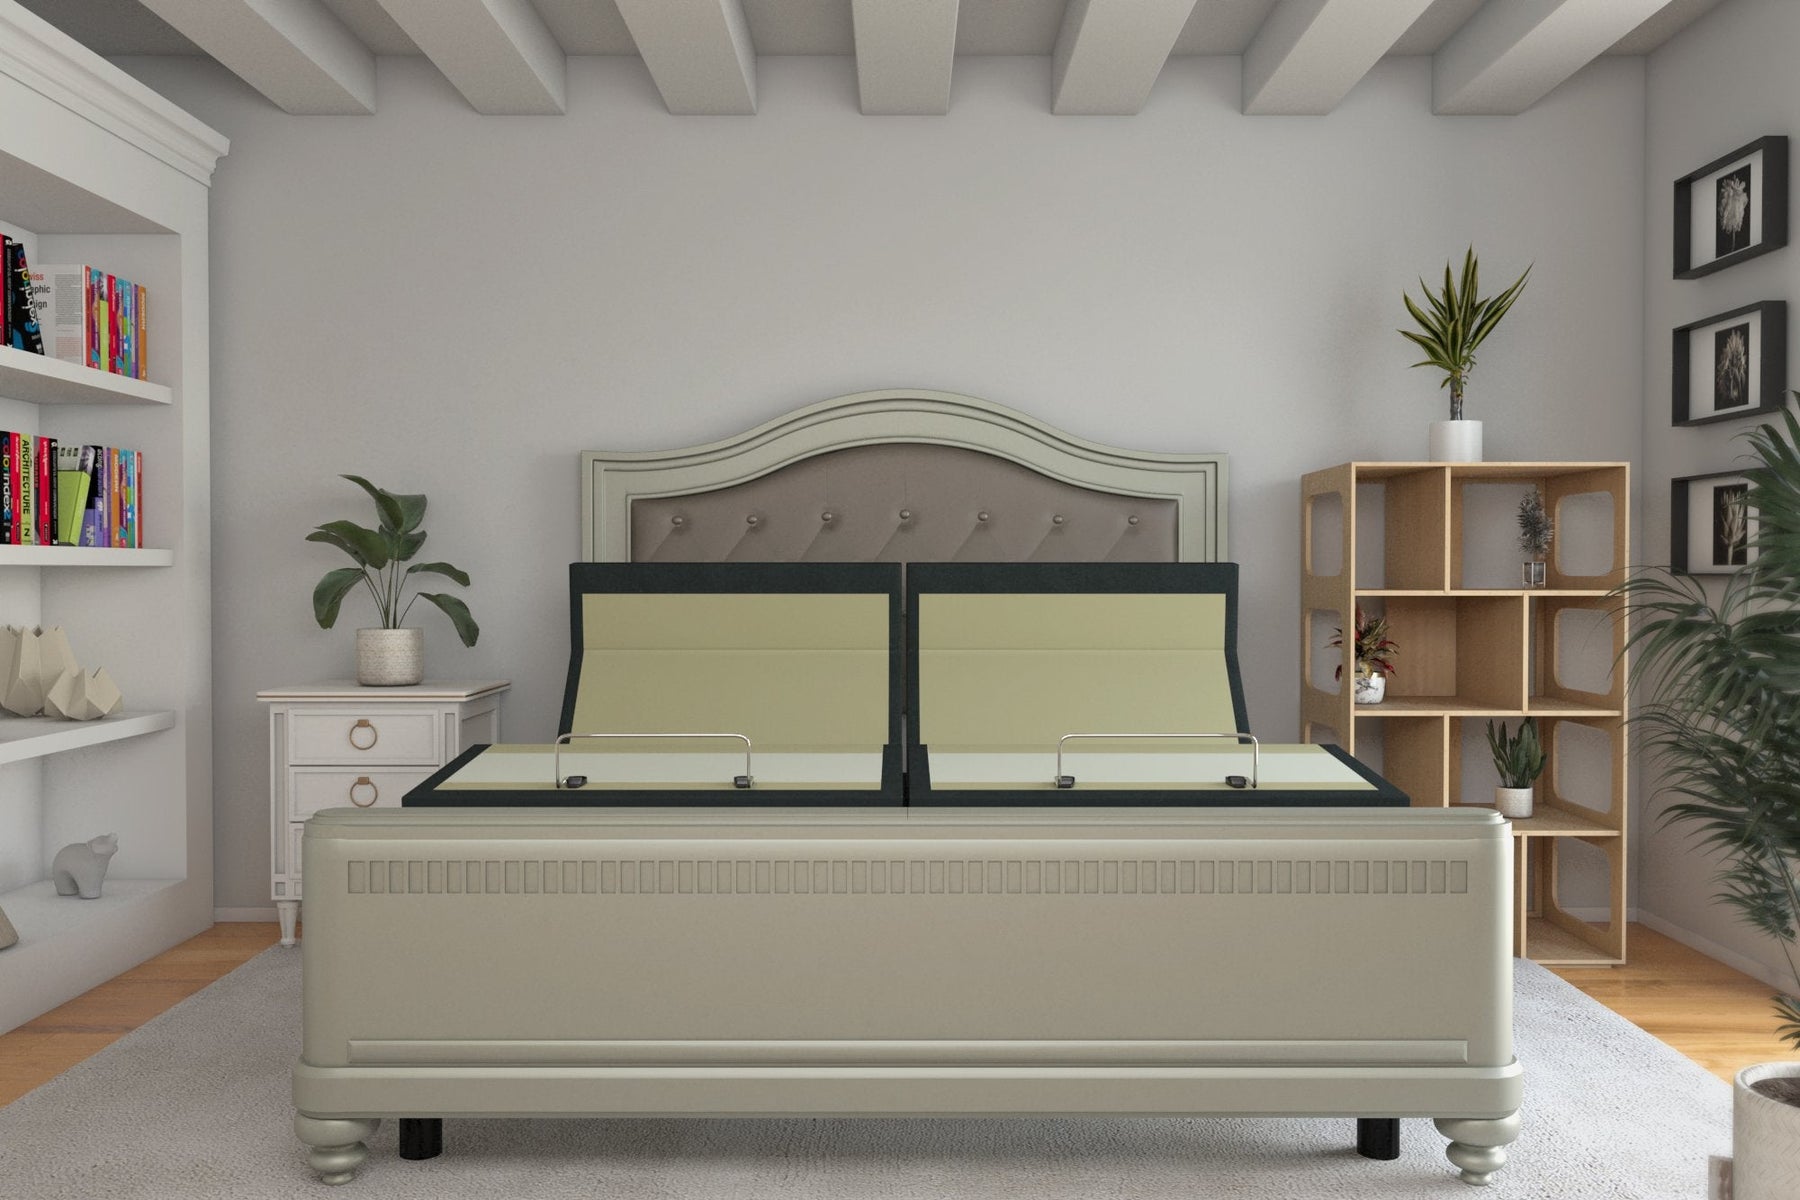 Can You Add a Bed Frame Headboard to an Adjustable Base?